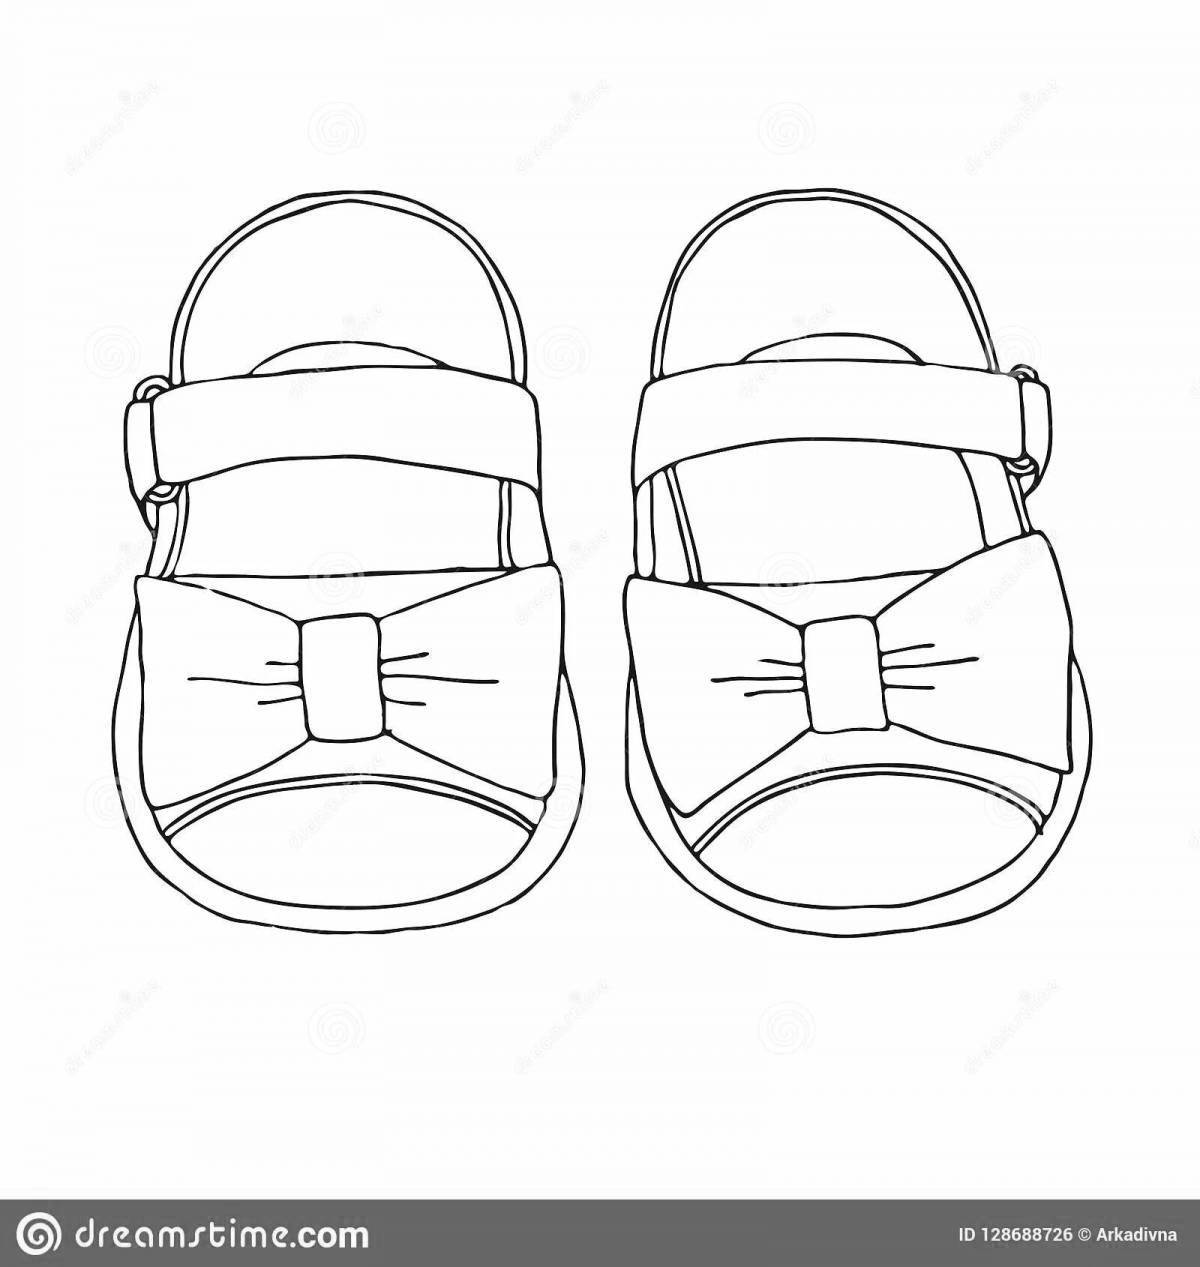 Playful sandals coloring page